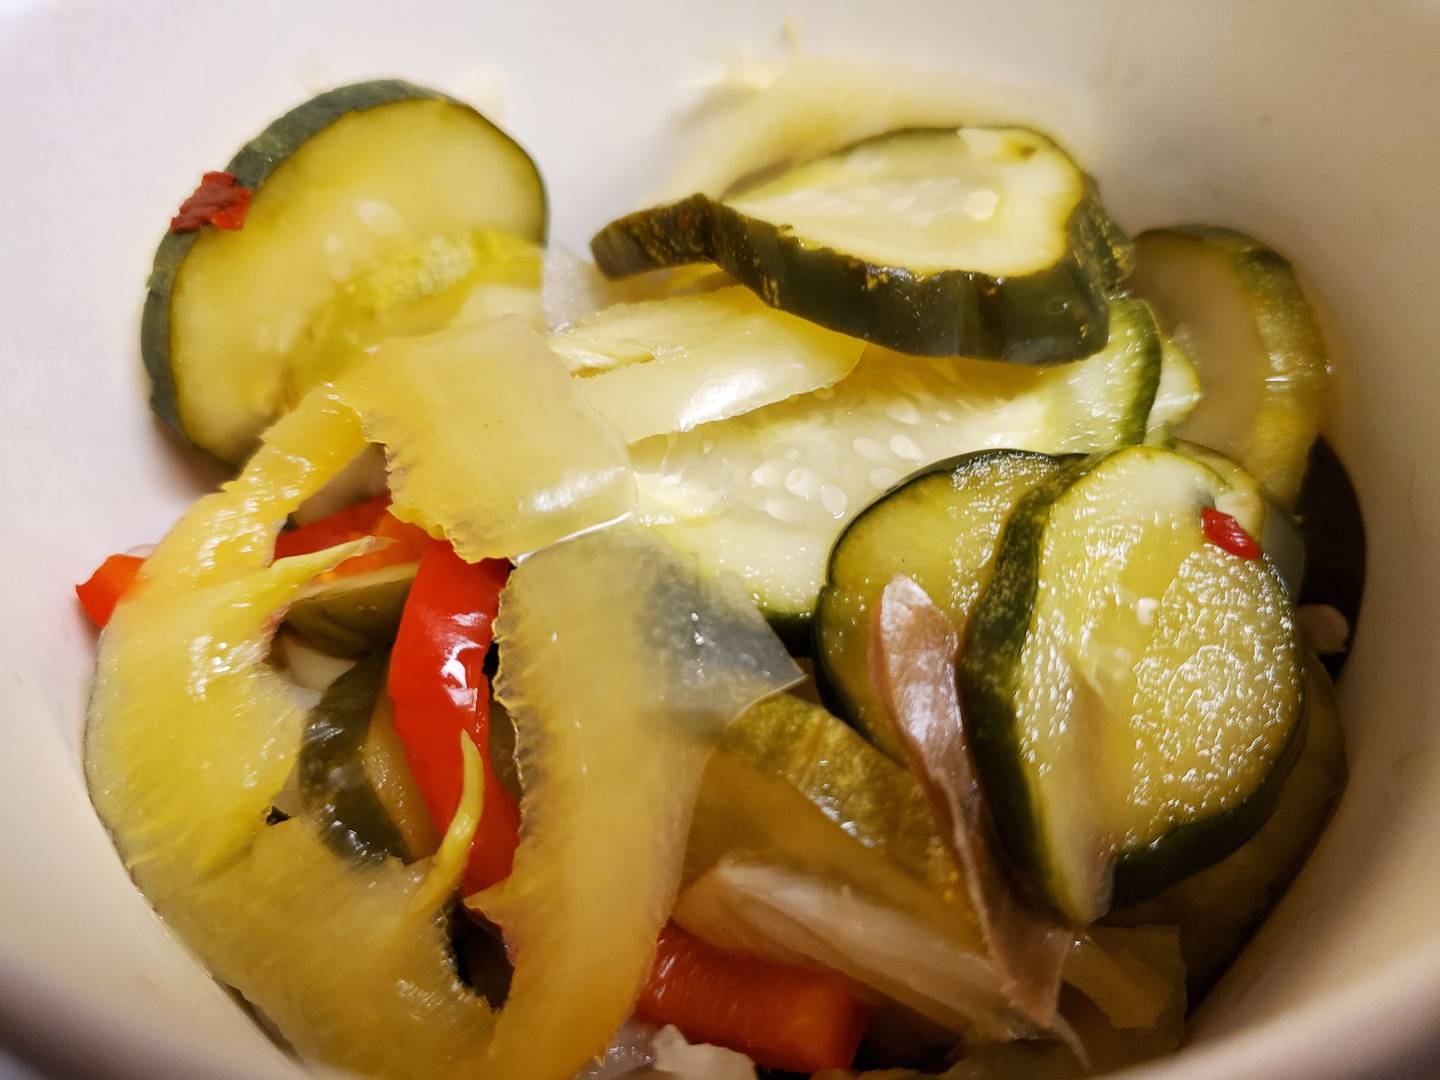 These spicy, peppery pickles are complimentary at Station One Smokehouse.